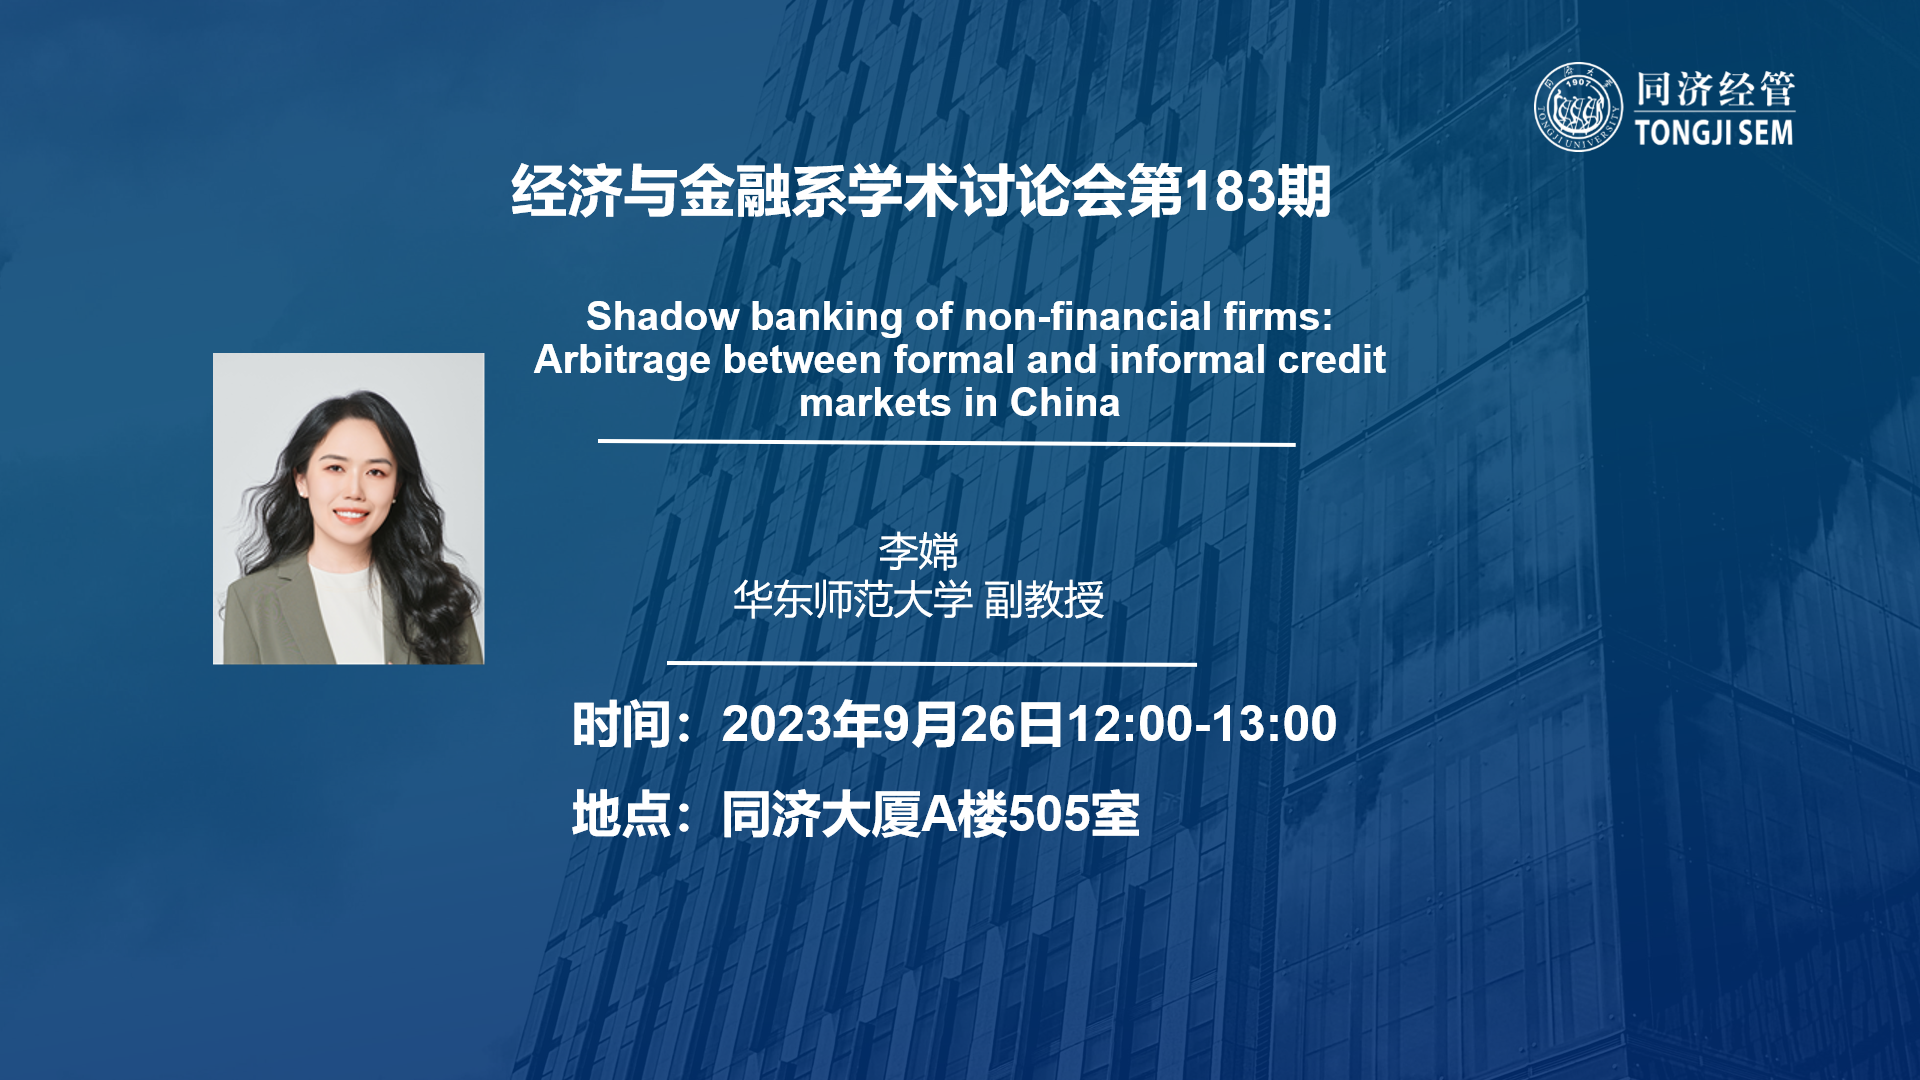 Shadow banking of non-financial firms: Arbitrage between formal and informal credit markets in China